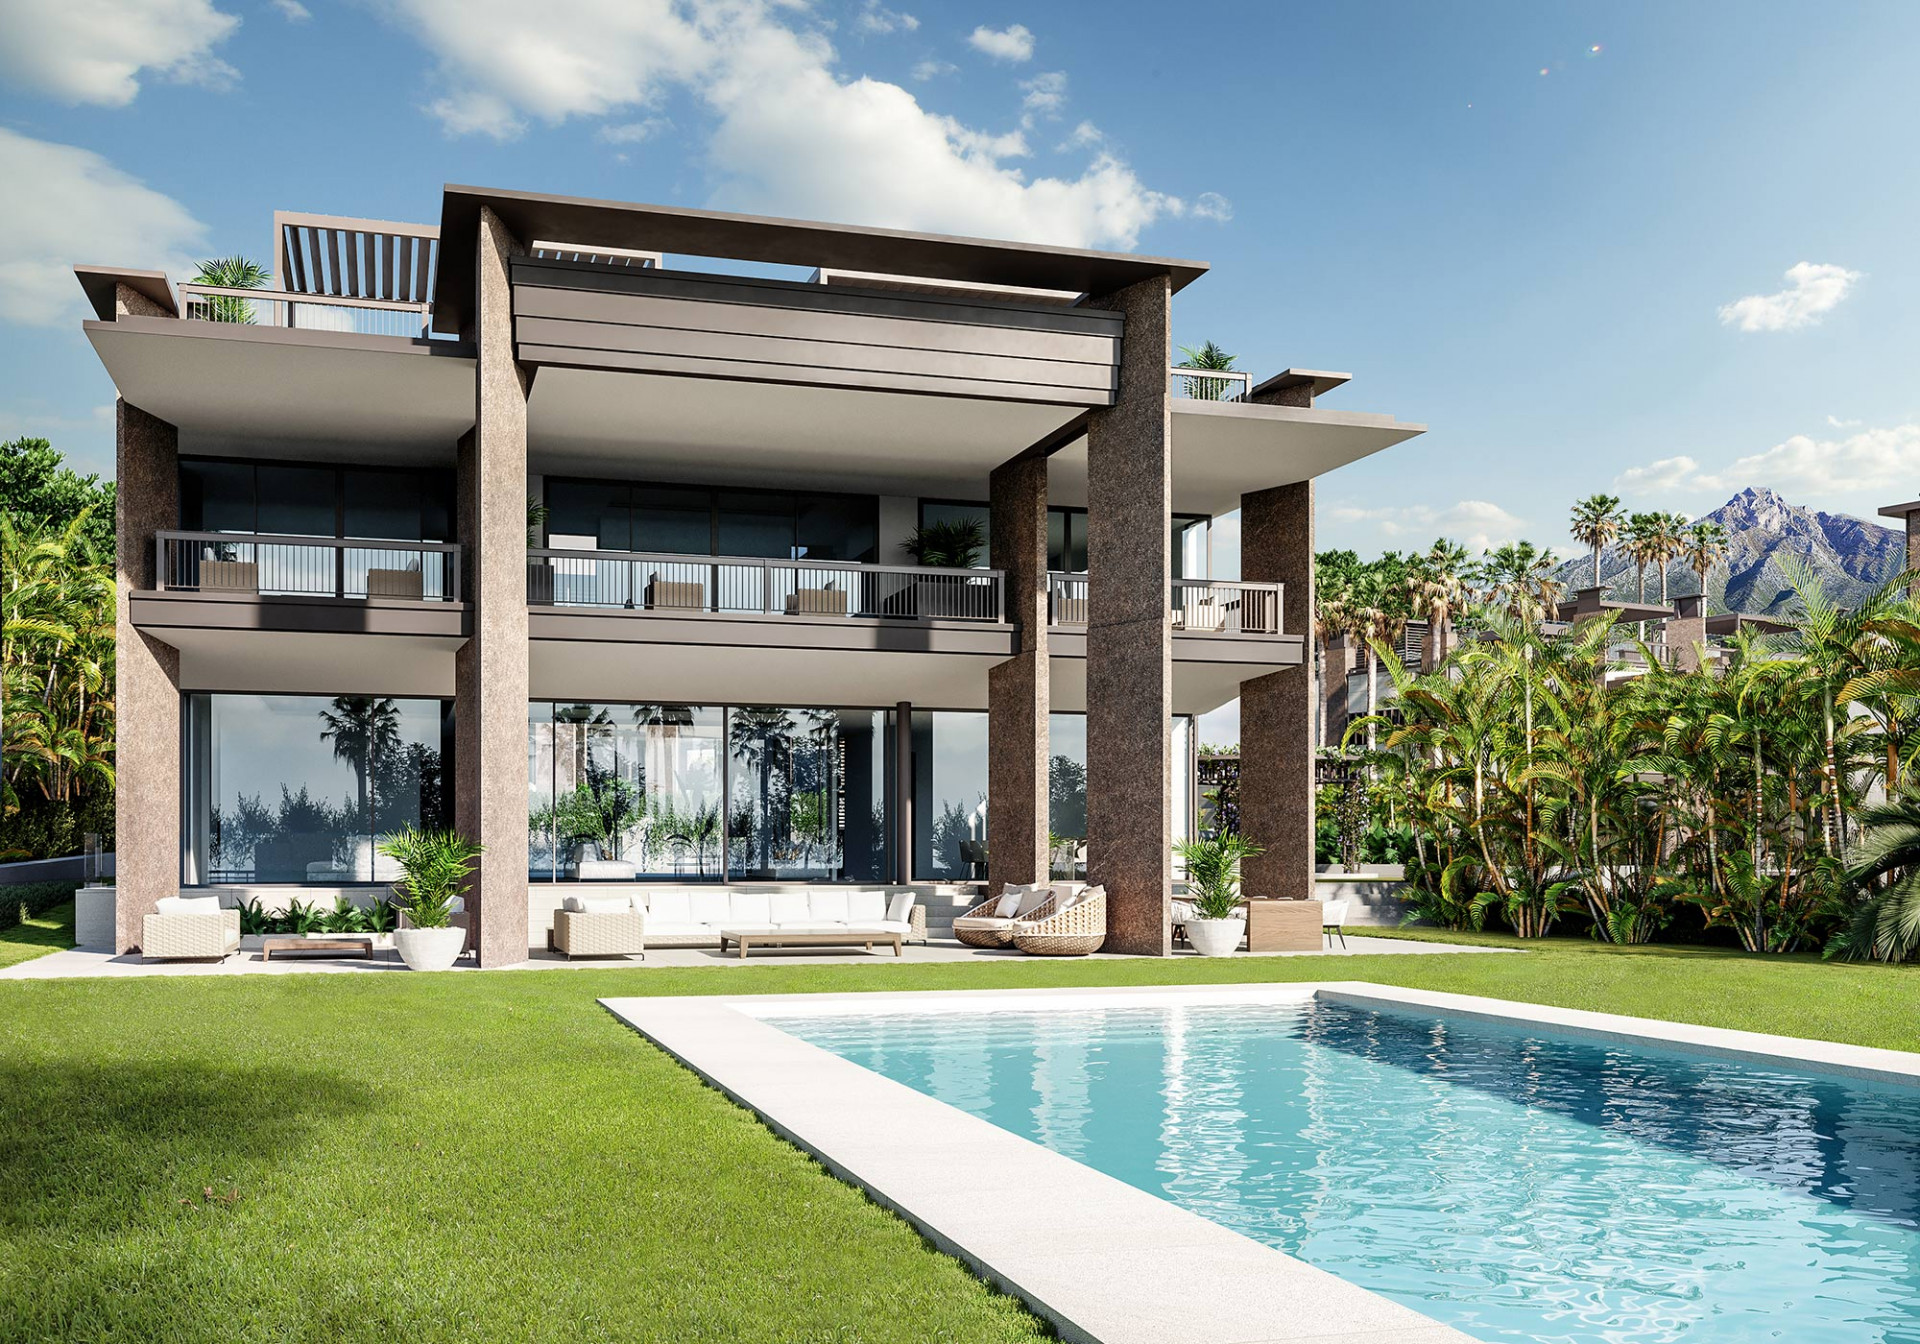 One of the most luxurious new developments being built within walking distance from the famous port of Puerto Banus in Marbella.